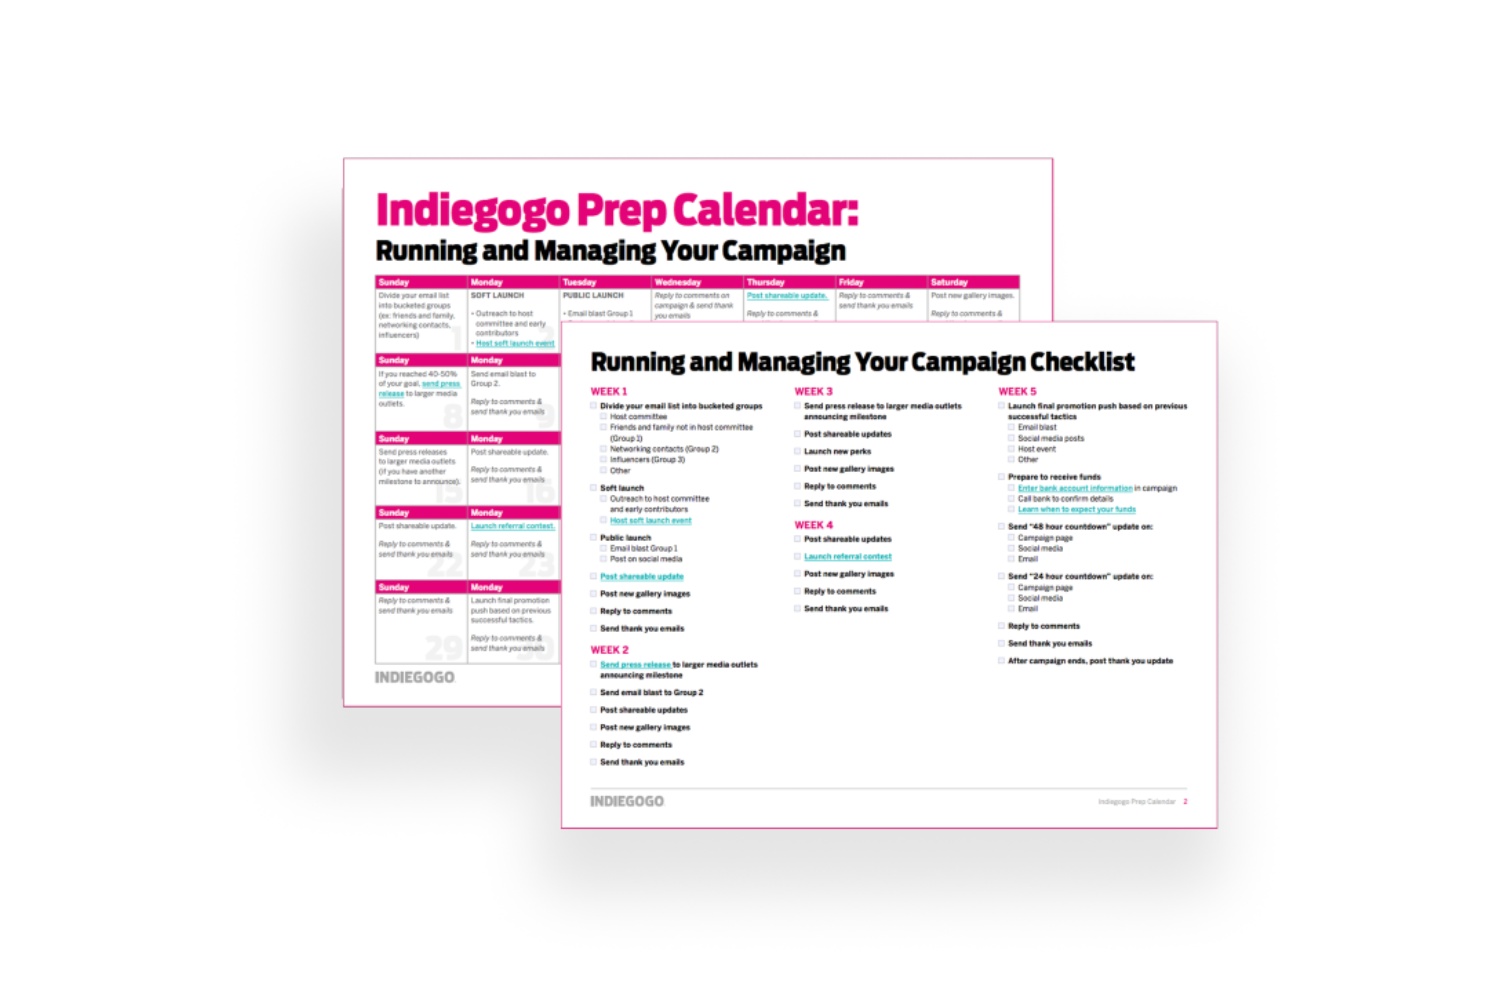 How To Soft Launch A Campaign On Indiegogo